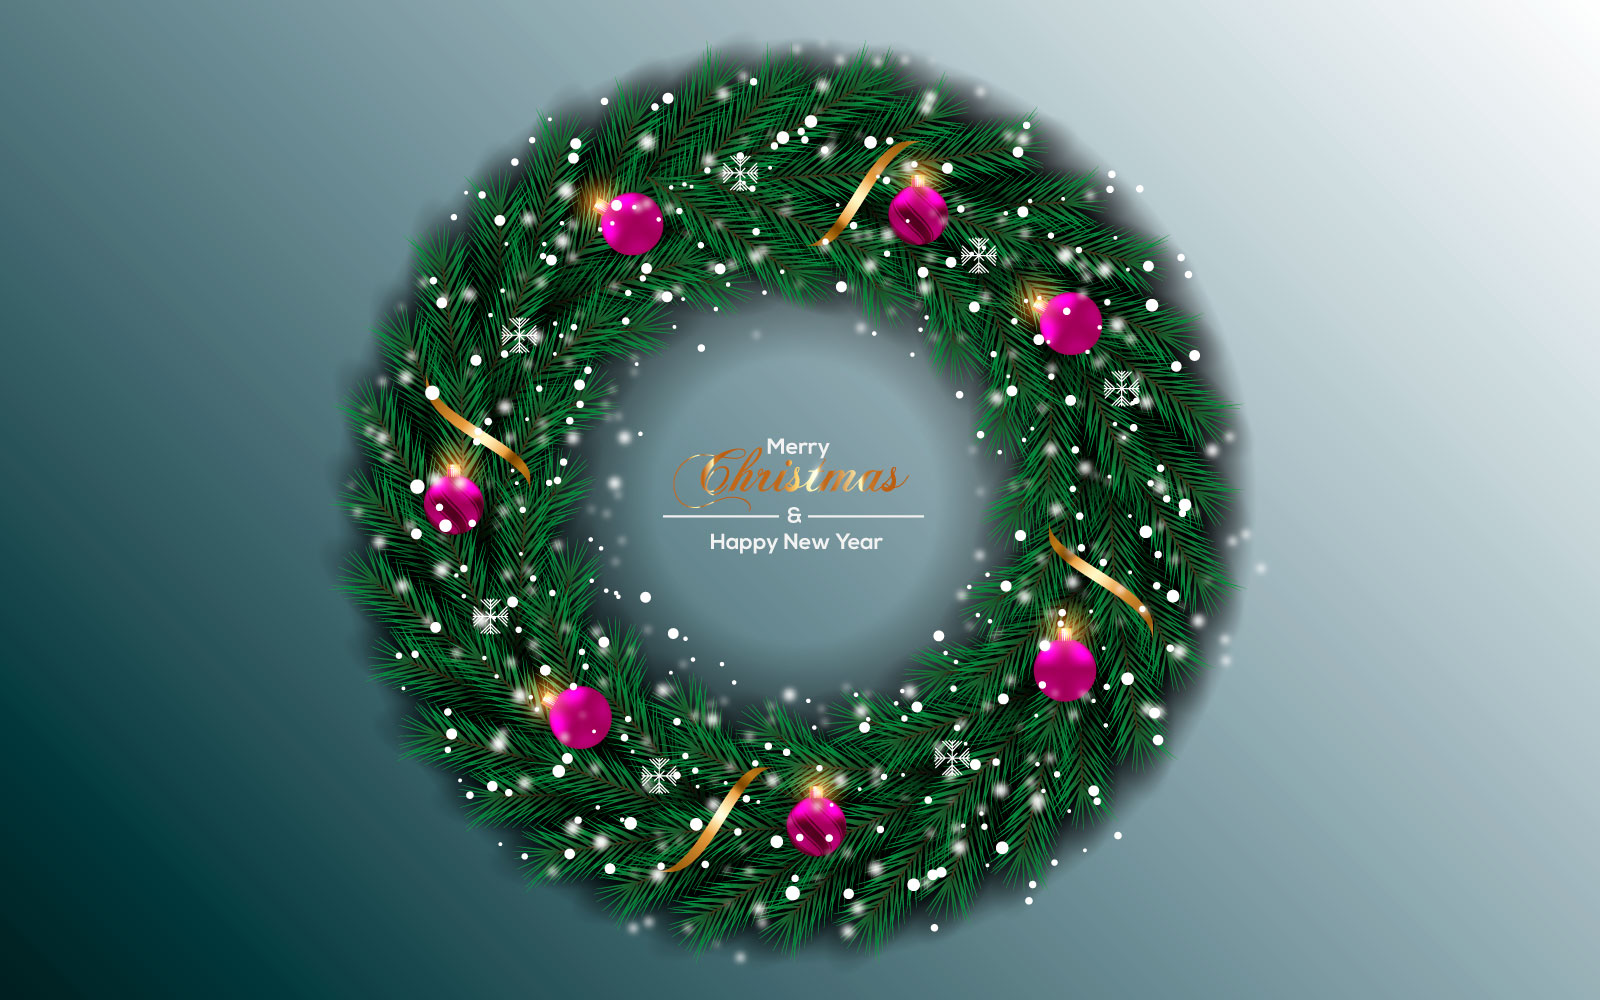 Christmas wreath with decorations isolated on color background with pine branch and ball style